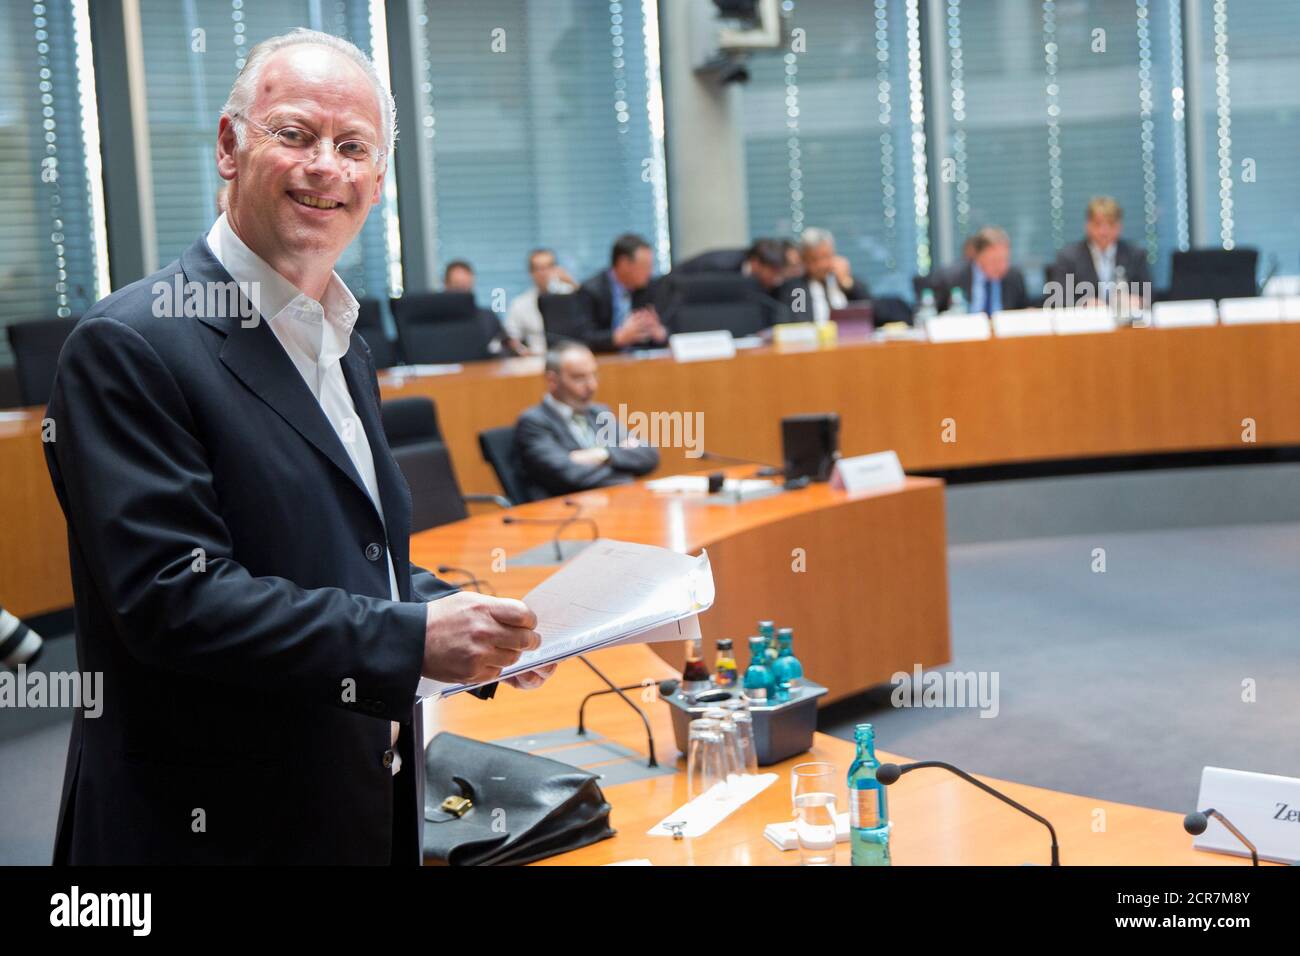 Former defence minister Rudolf Scharping appears as a witness at a parliamentary inquiry committee on the Euro Hawk drone project in Berlin, July 22, 2013.  REUTERS/Thomas Peter (GERMANY - Tags: POLITICS MILITARY) Stock Photo